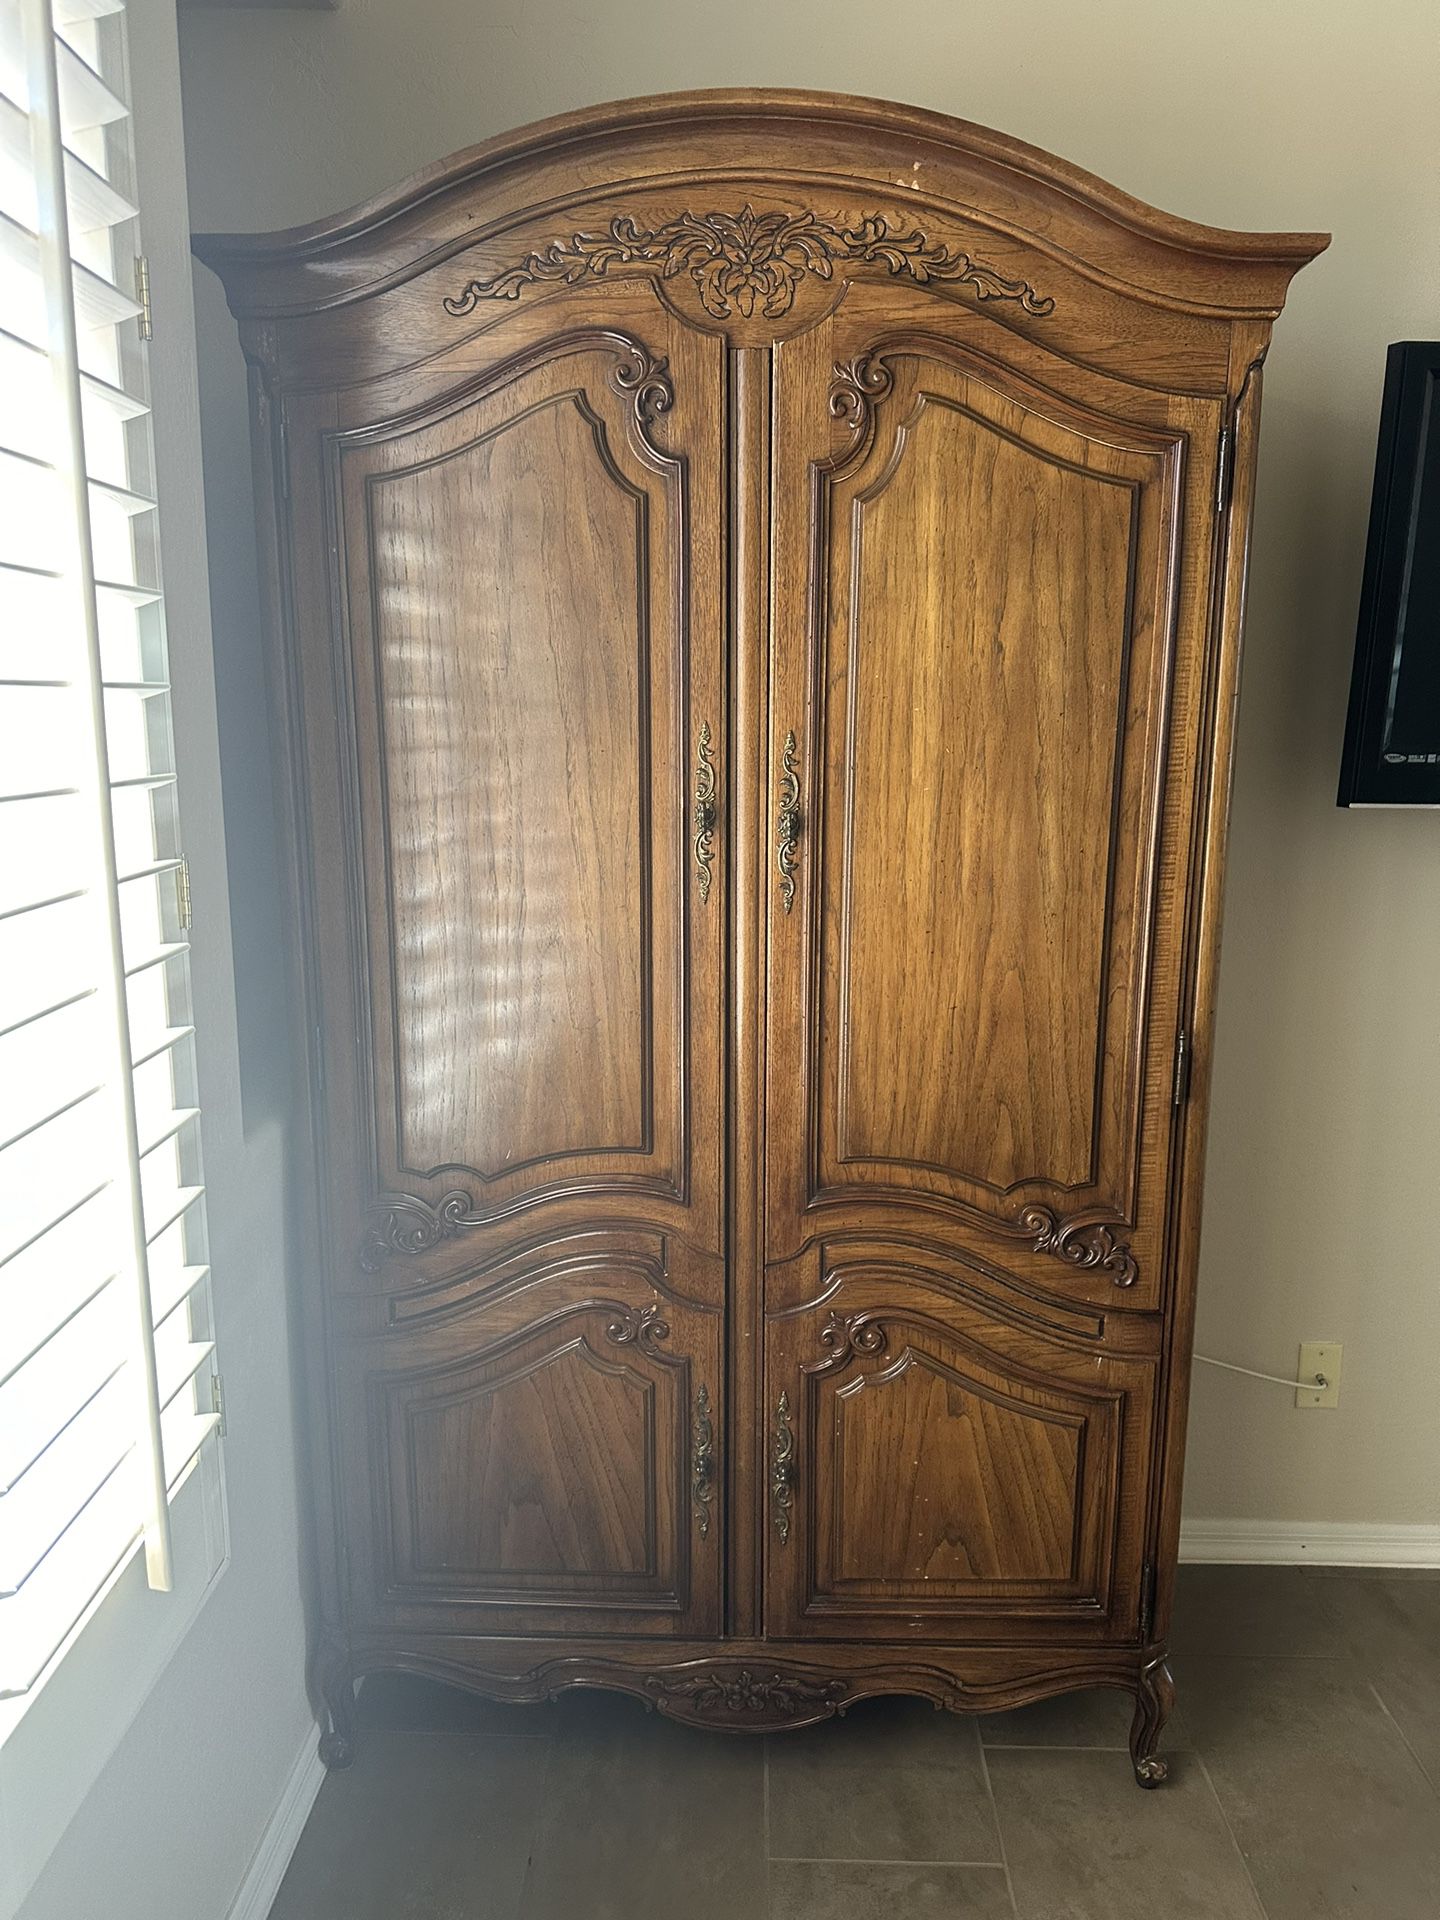 Bedroom Armoire With Drawers